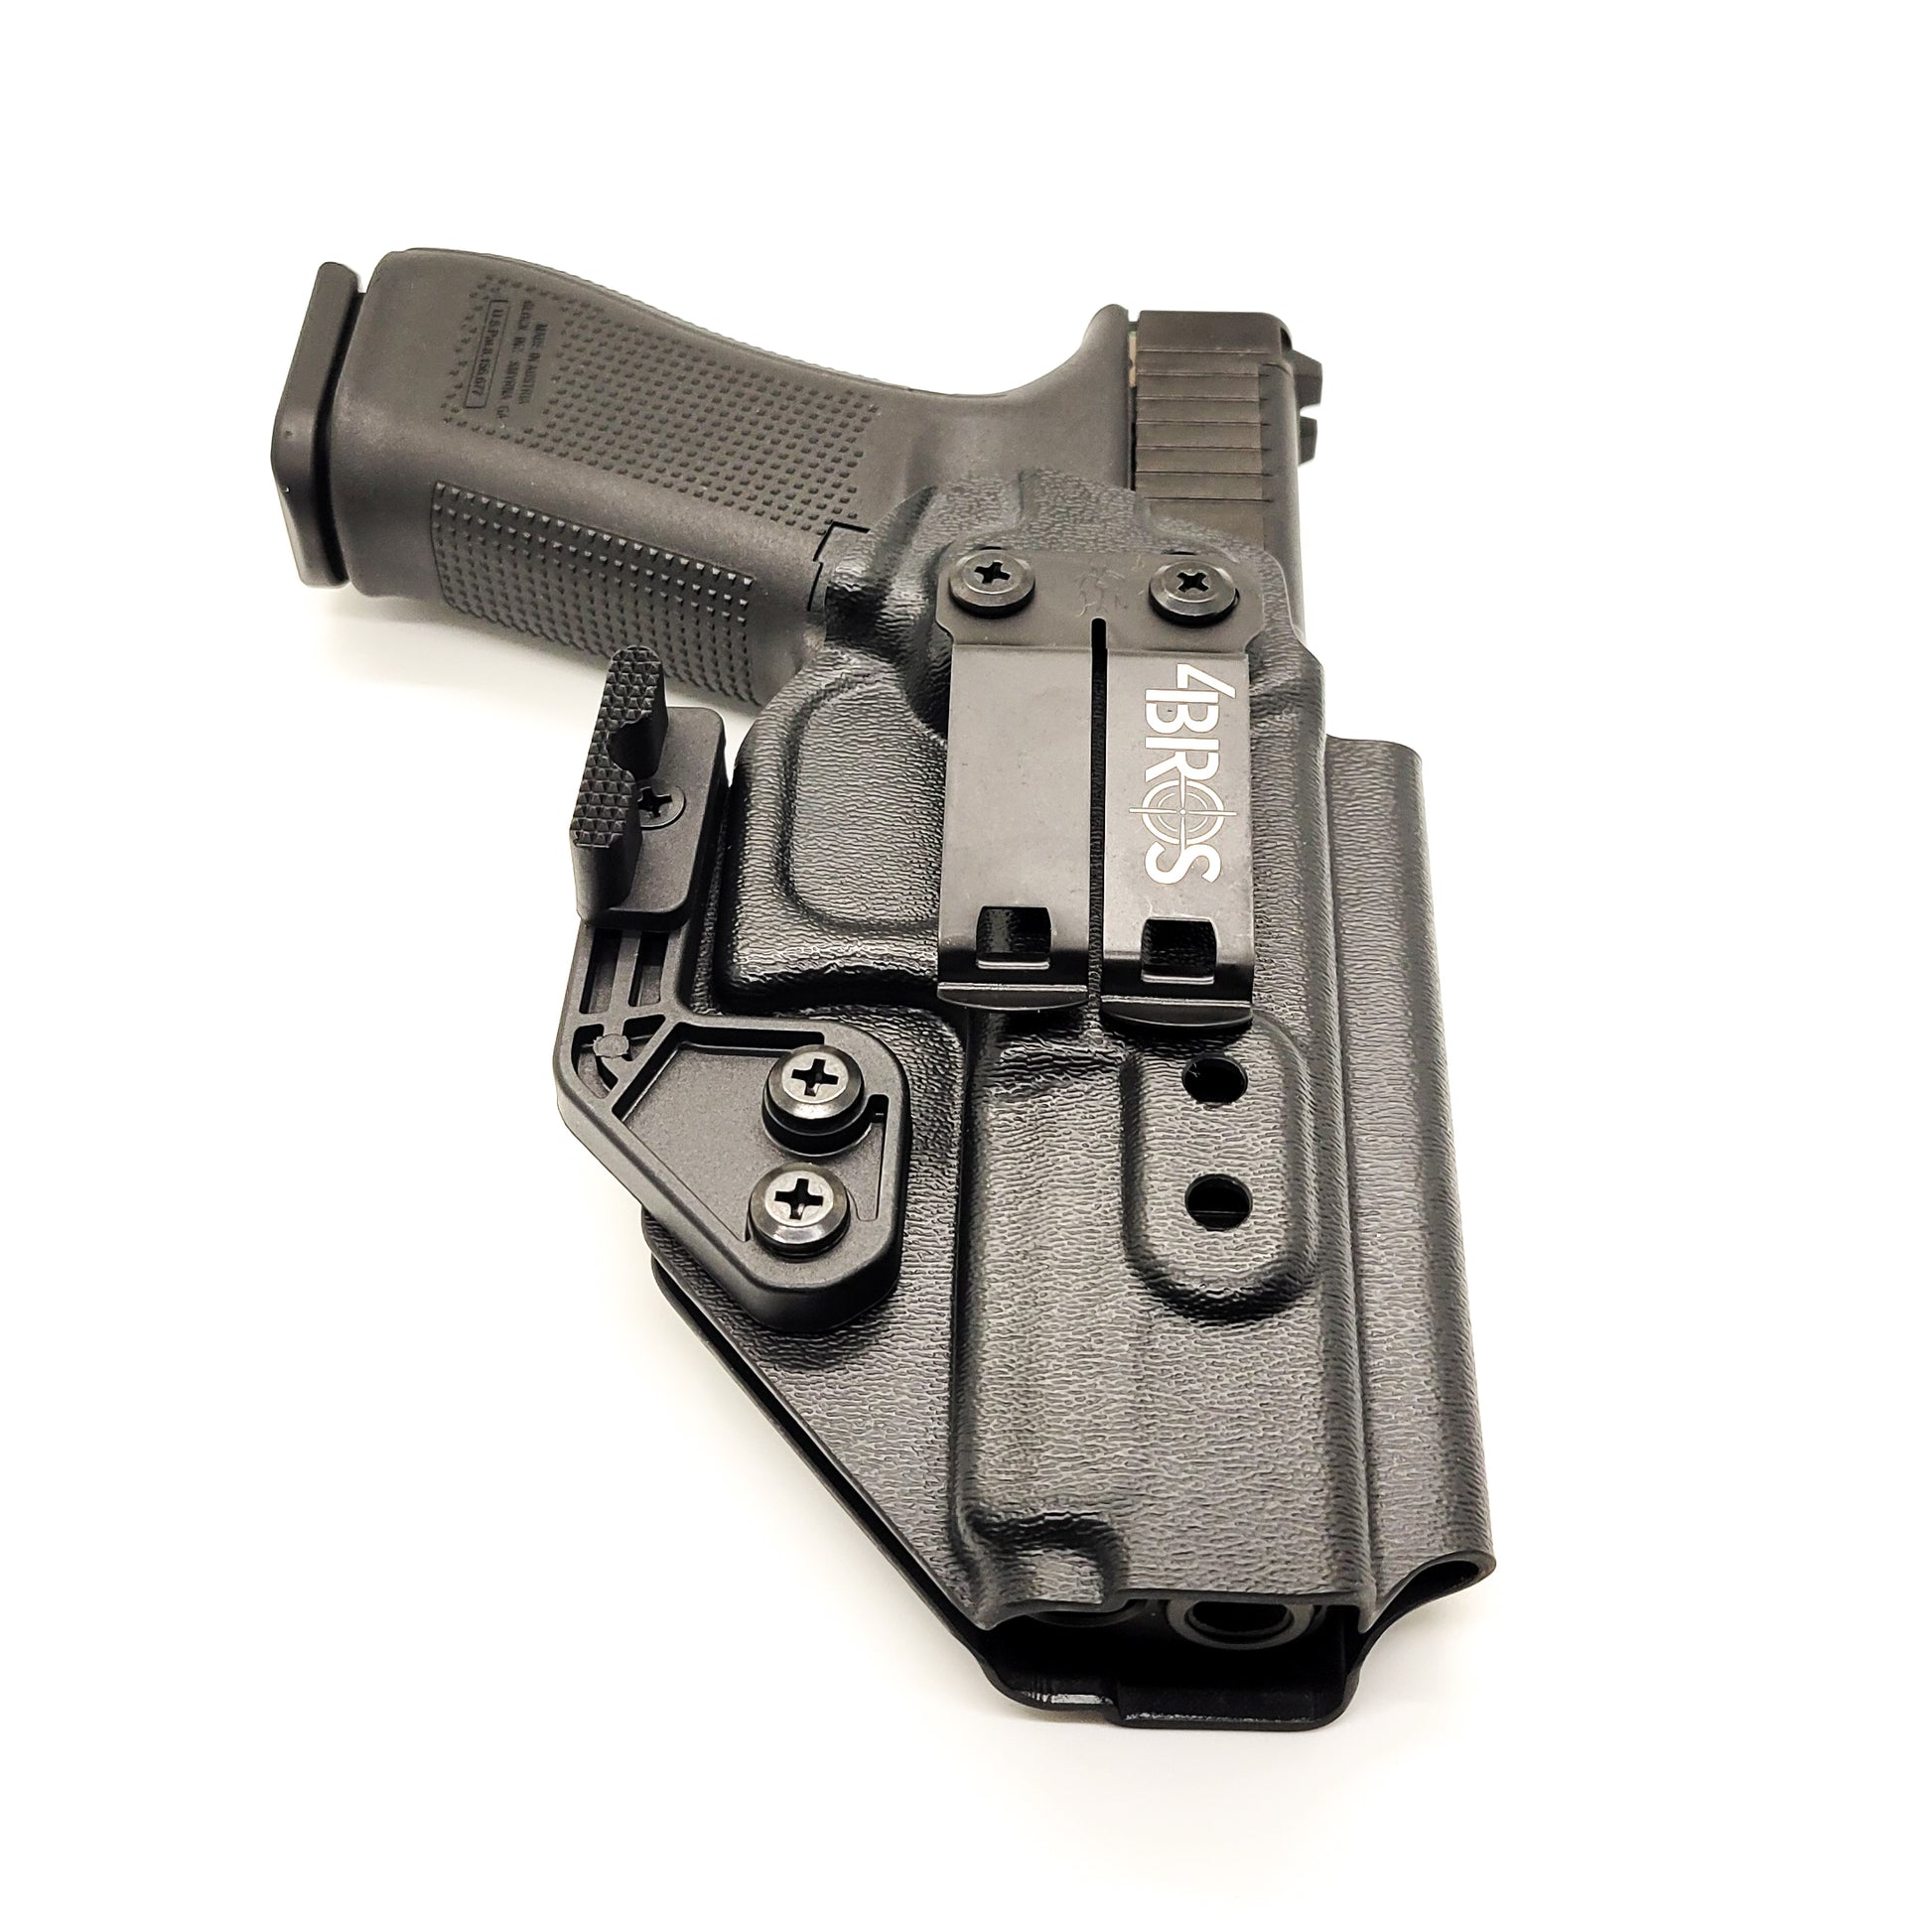 For the best Inside Waistband IWB AIWB Kydex Taco Style Holster designed to fit the Glock 17 Gen 3, Gen 4, Gen 5, Gen 4 MOS, and 5 MOS, shop Four Brothers Holsters. Adjustable ride height and cant. Smooth edges and slim profile to reduce printing. Fast shipping with short order lead times. Made in the USA G17